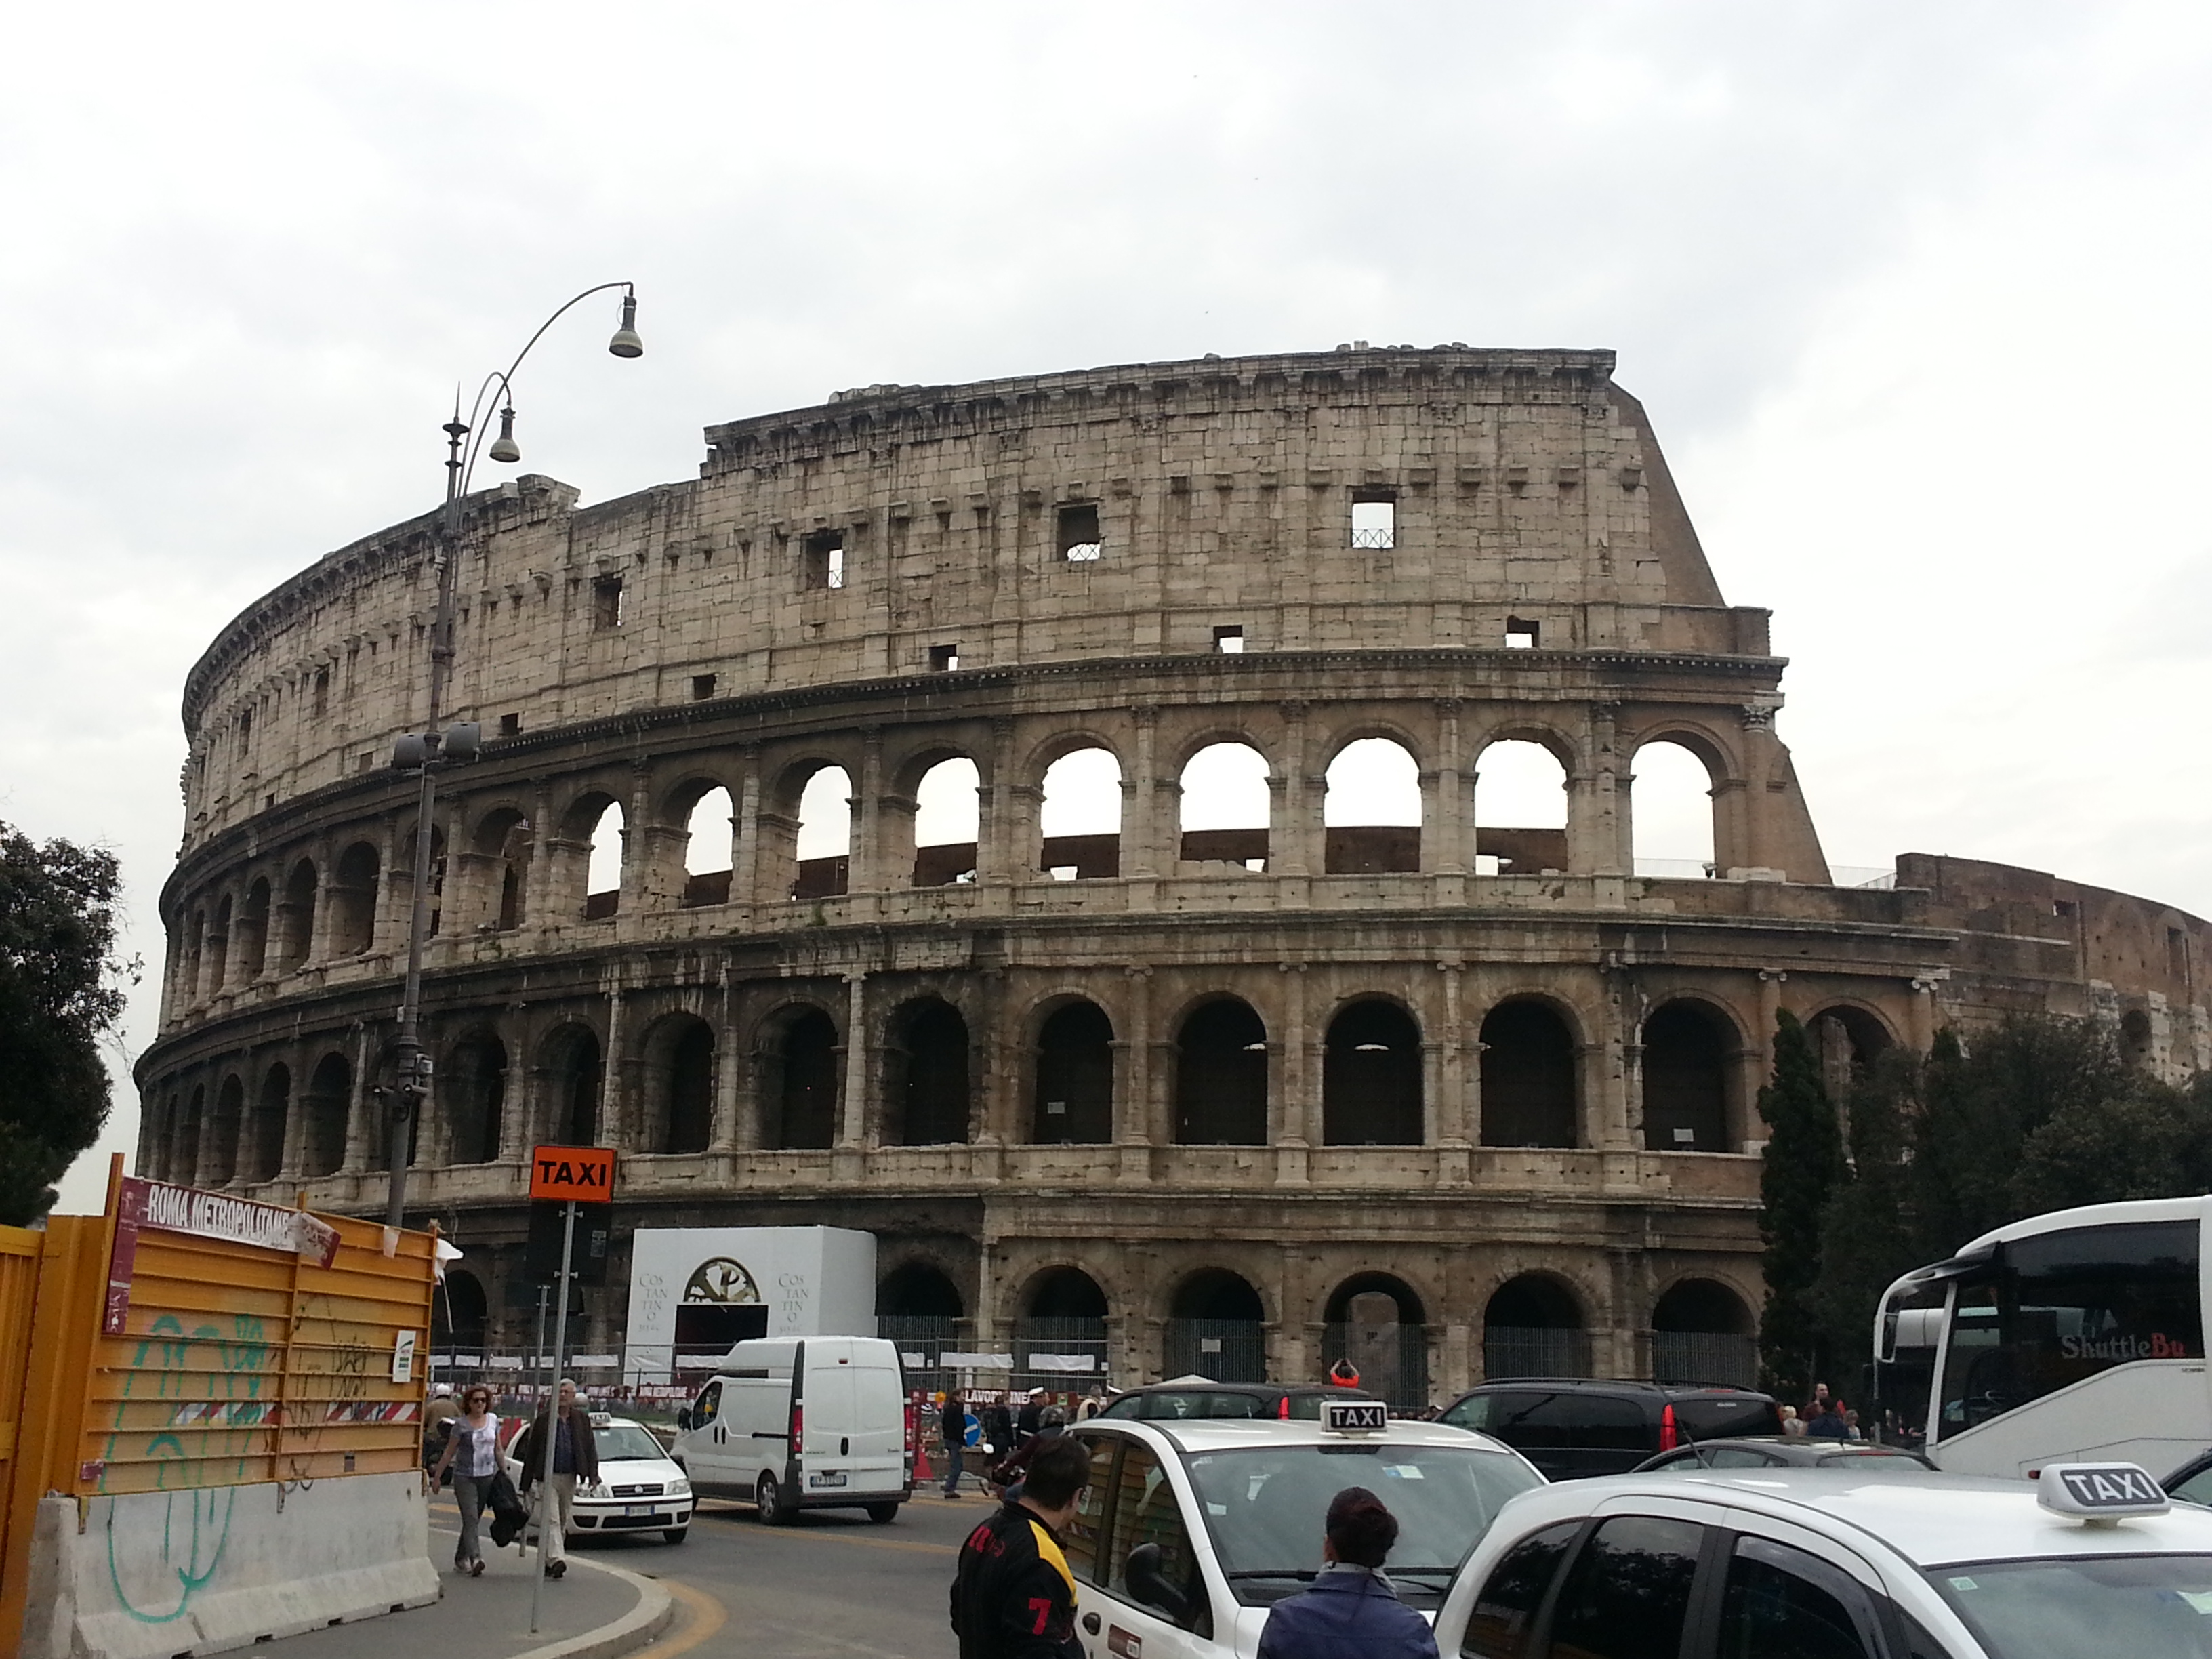 External View of the Colosseum in Rome, Italy